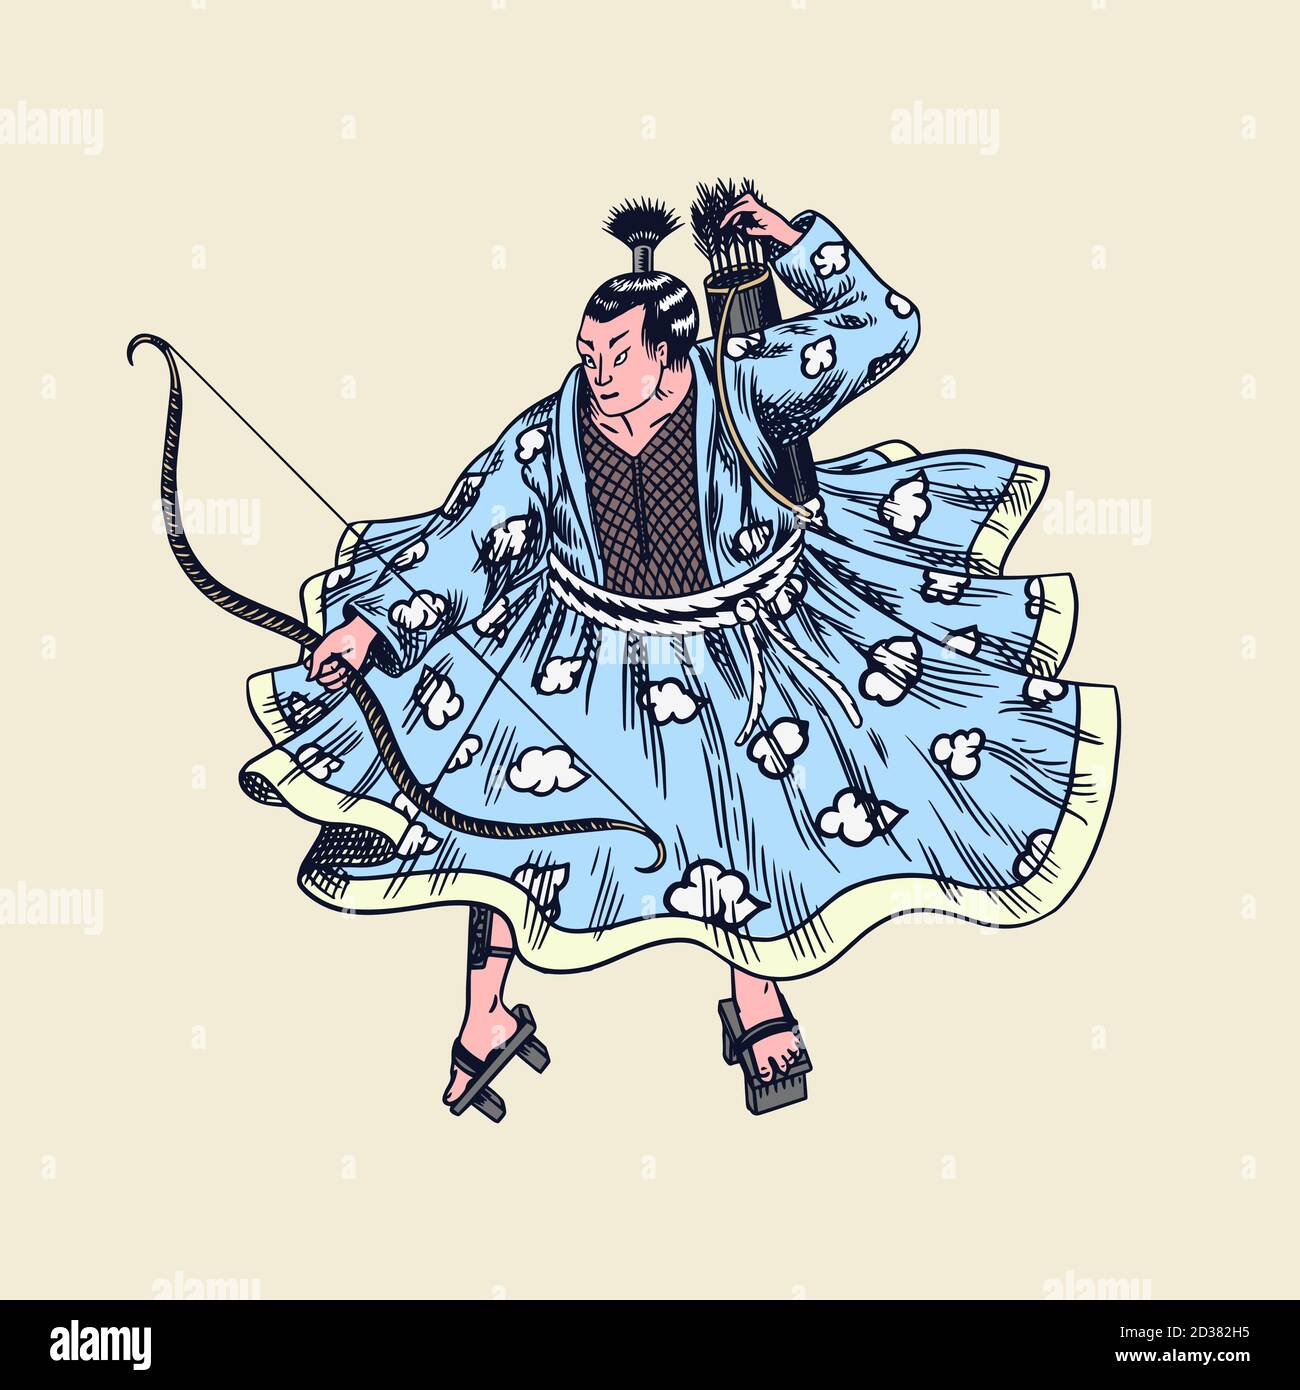 Japanese samurai. Warriors with weapons sketch. Men in a fight pose. Hand drawn vintage sketches. Vector illustration in monochrome style. Stock Vector